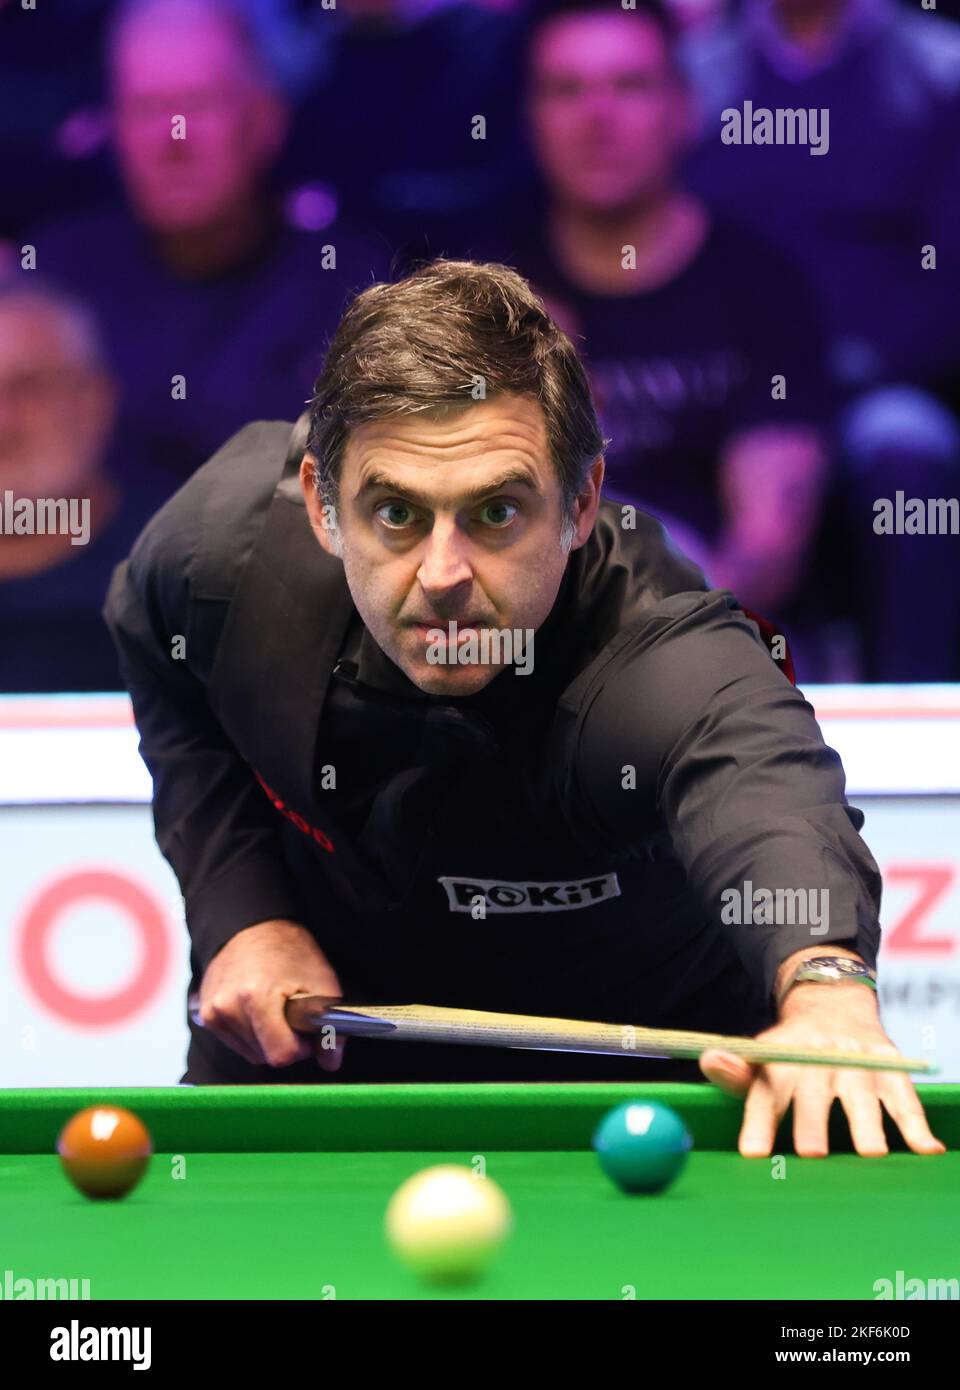 Englands Ronnie OSullivan during day five of the Cazoo UK Snooker Championship at the York Barbican